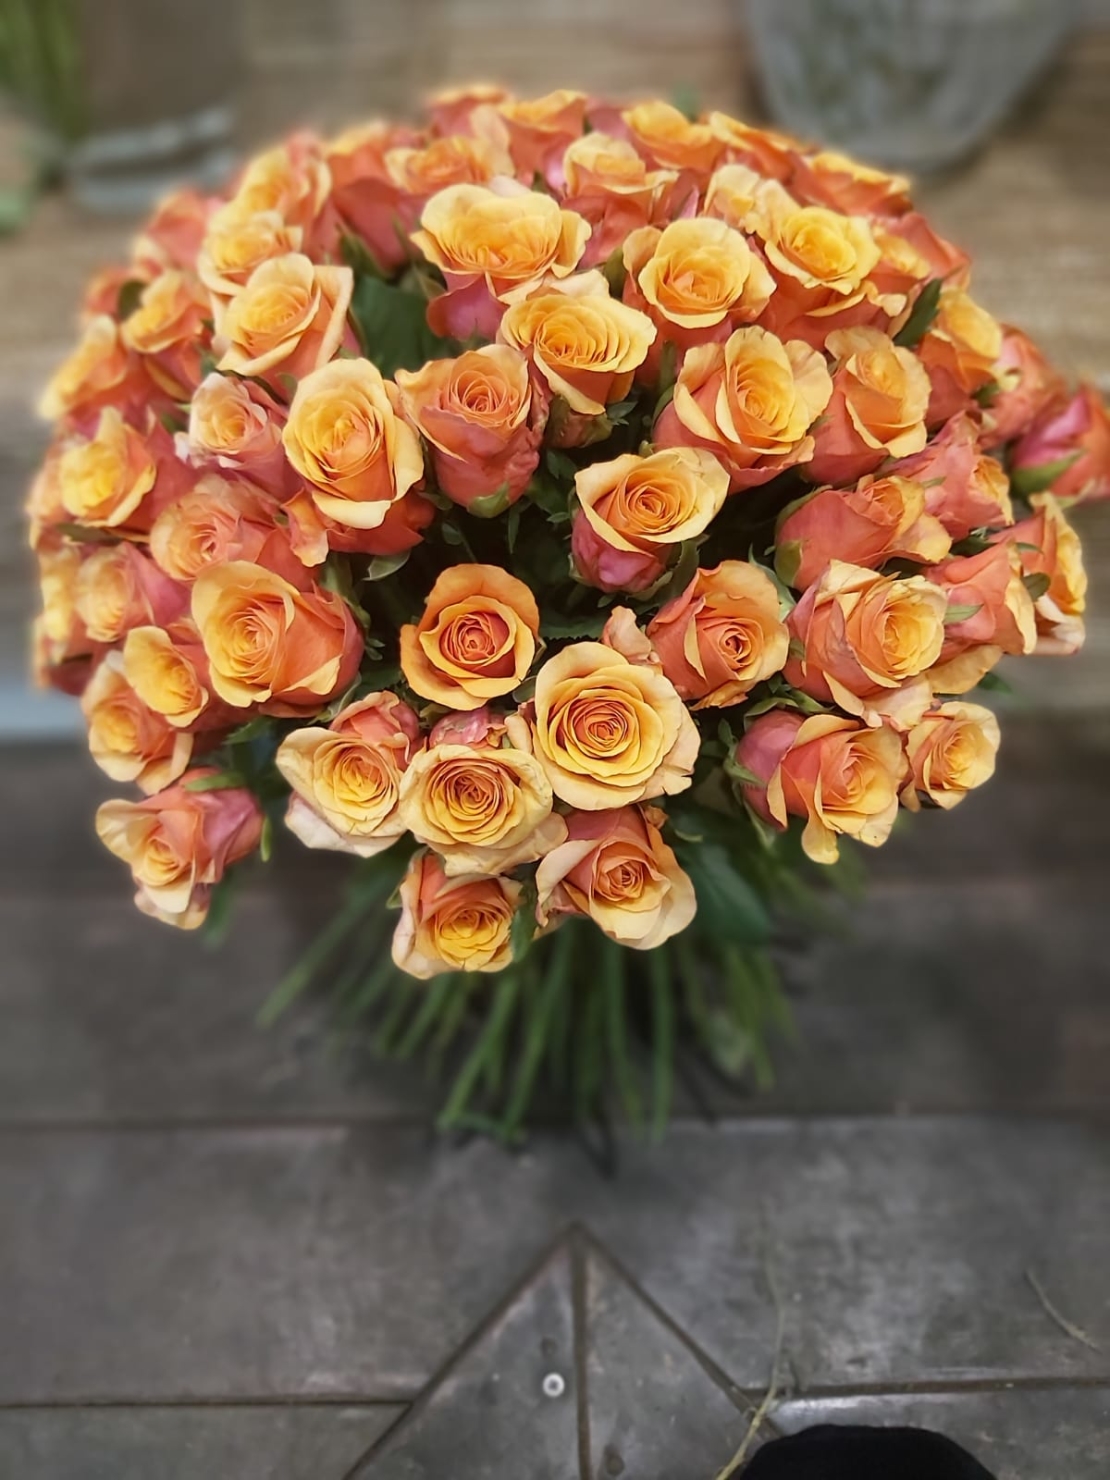 Bouquet of 100 roses # 30